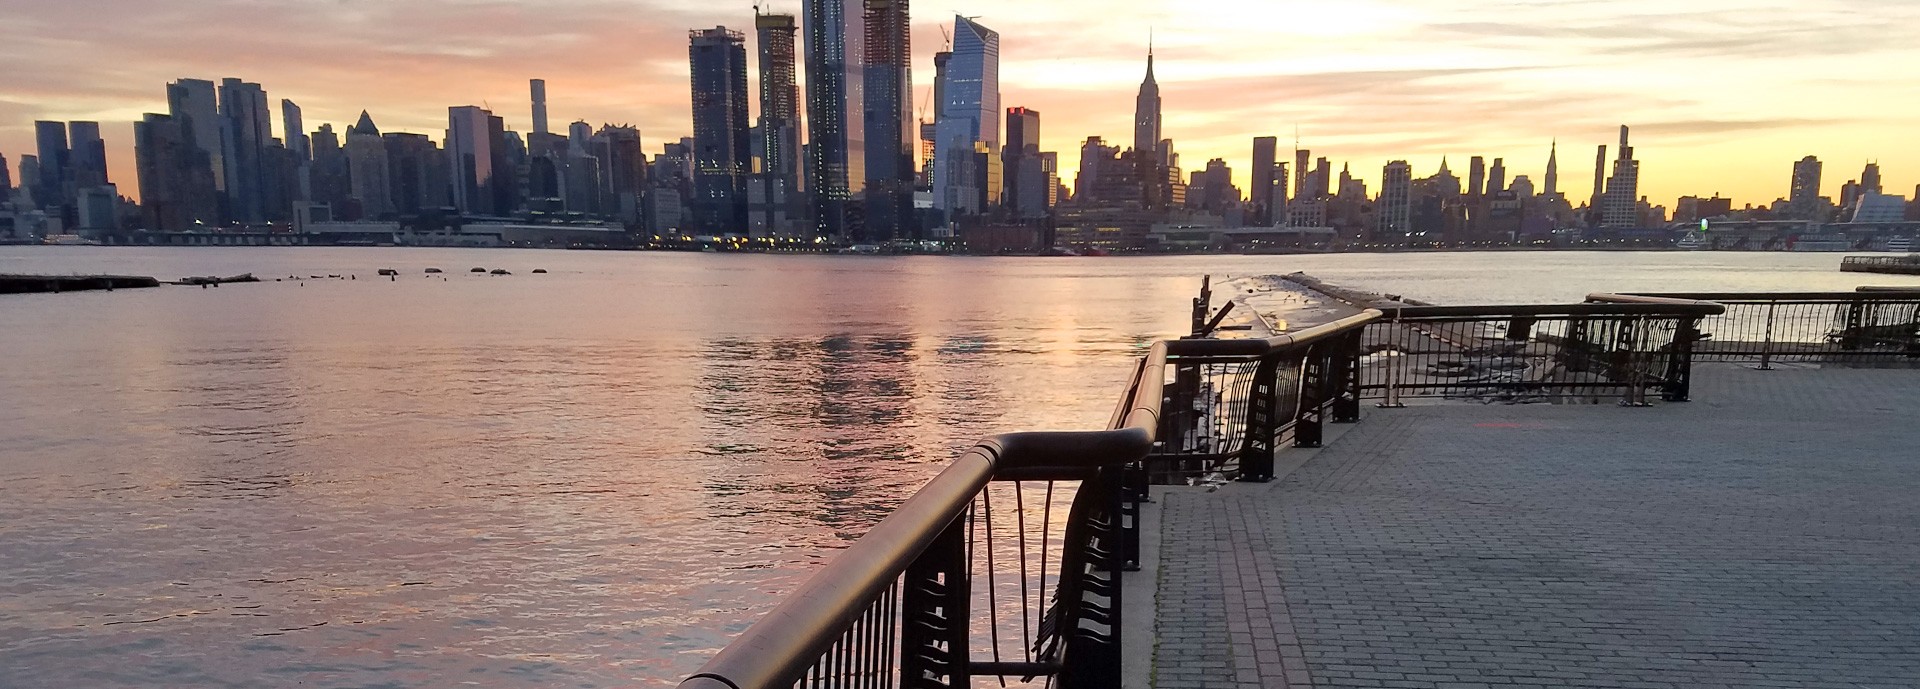 pier on hudson river at sunset with skyline in background